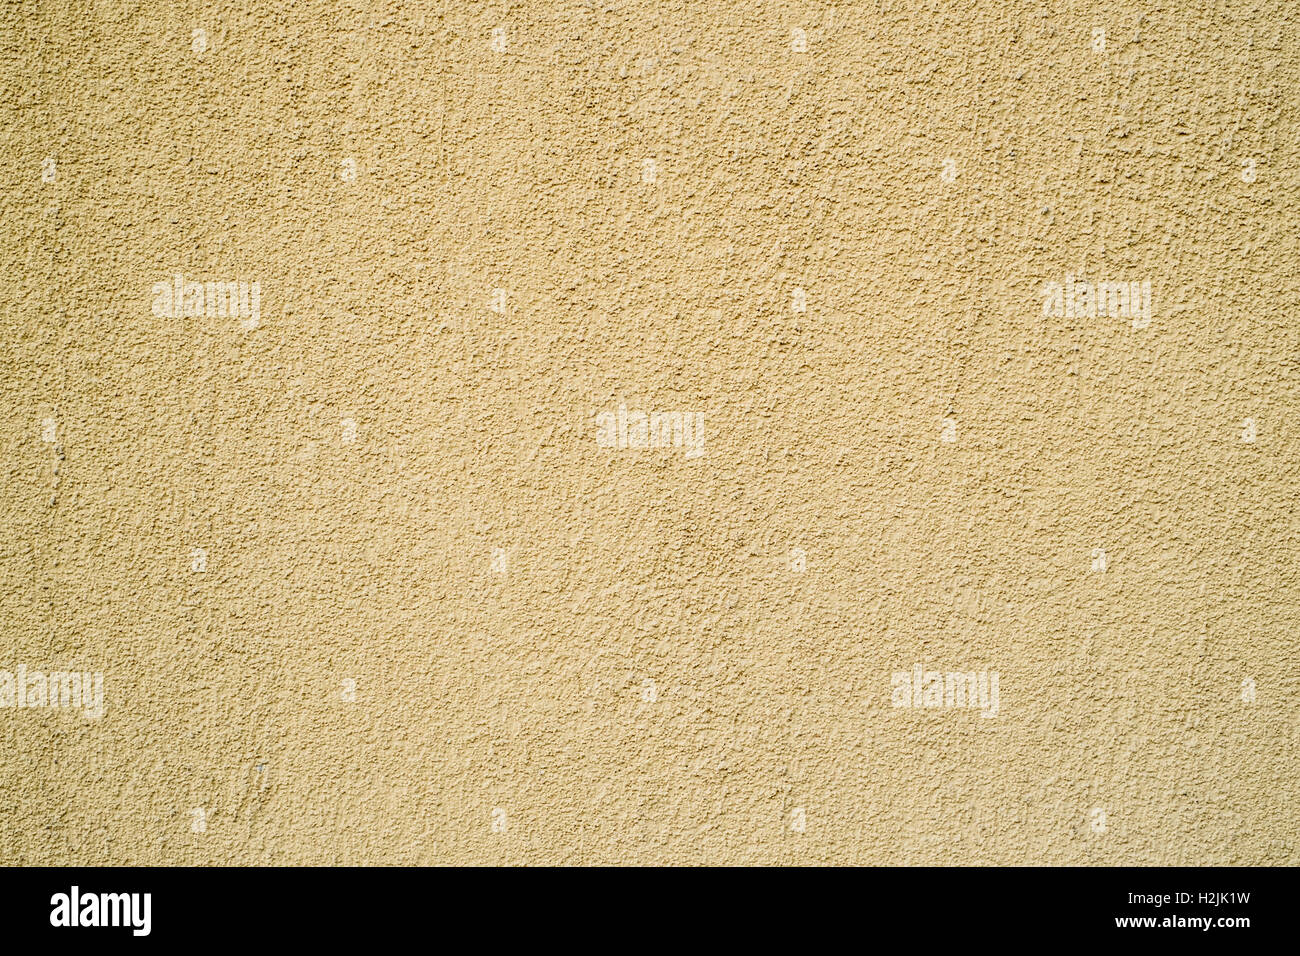 yellow plaster wall covering Stock Photo